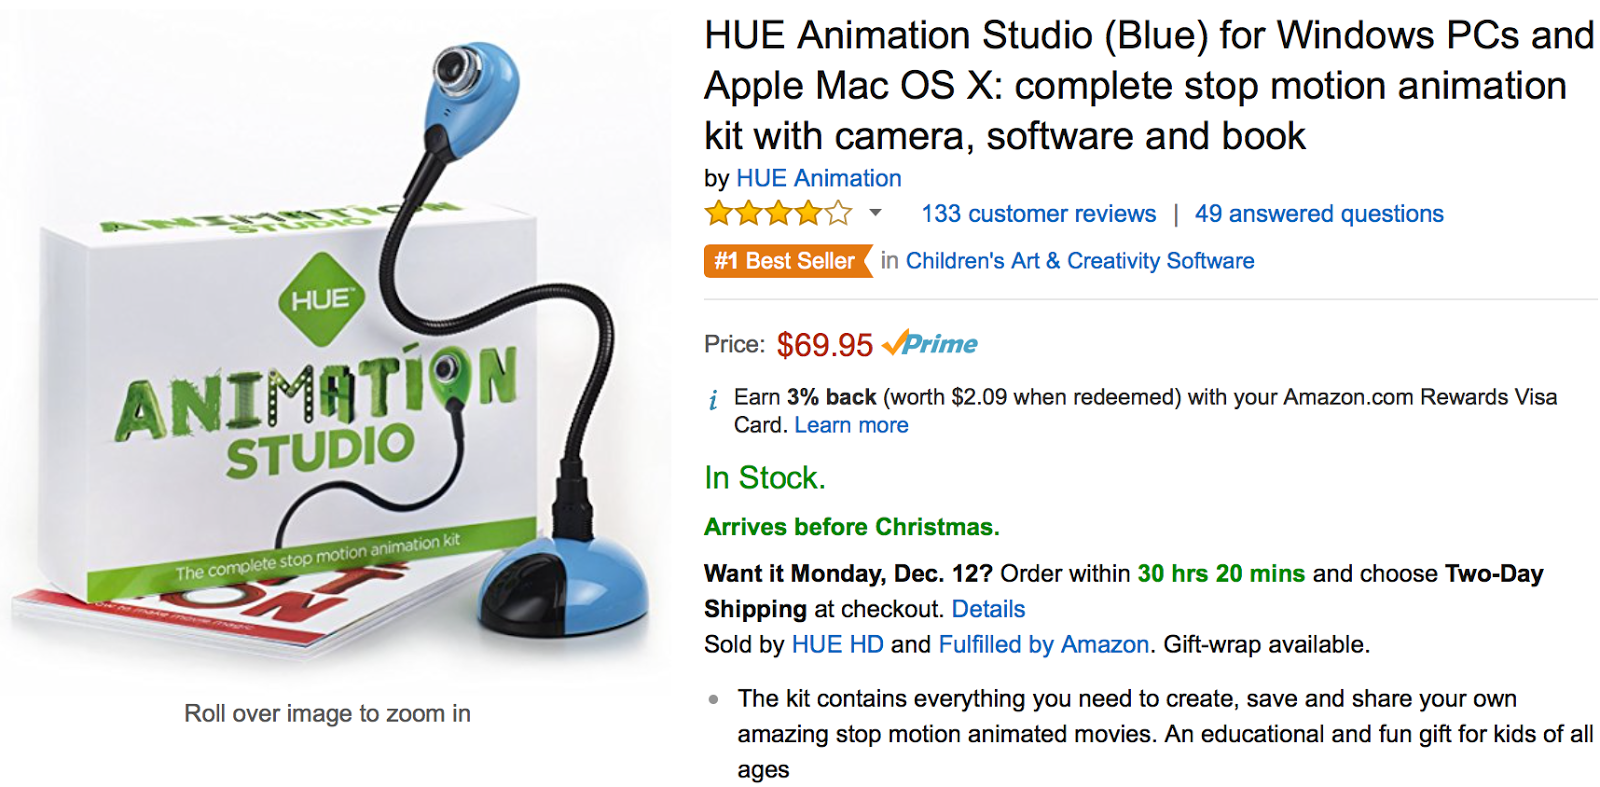 HUE Animation Studio: Complete Stop Motion Animation Kit (Camera, Software,  Book) for Windows/macOS (Blue)